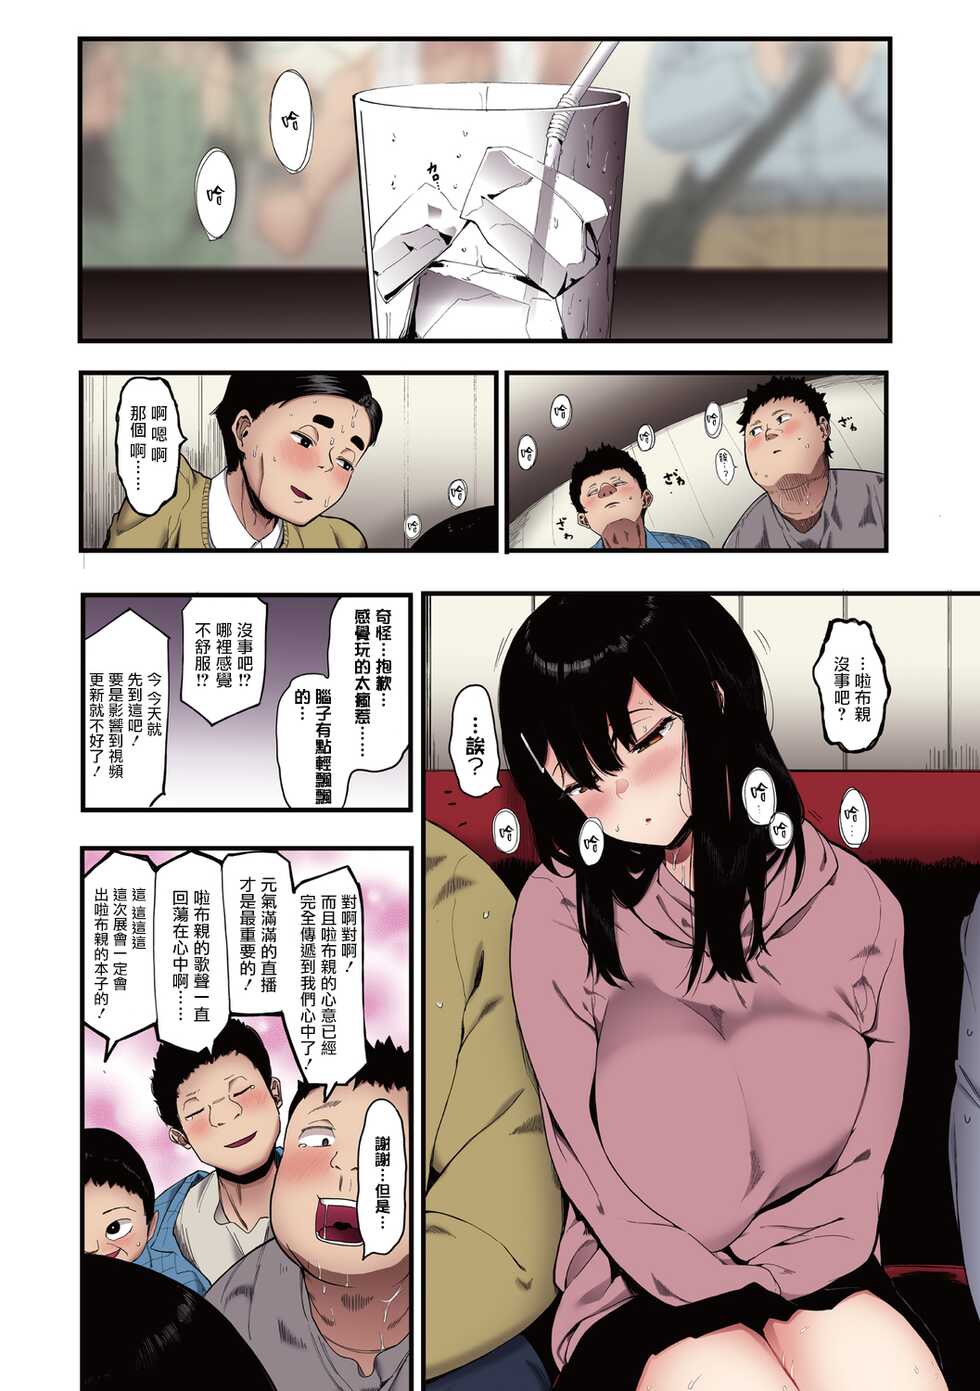 [Eightman] Mebuki [Full Color] [Chinese] [无毒汉化组] [Digital] [Ongoing] - Page 8